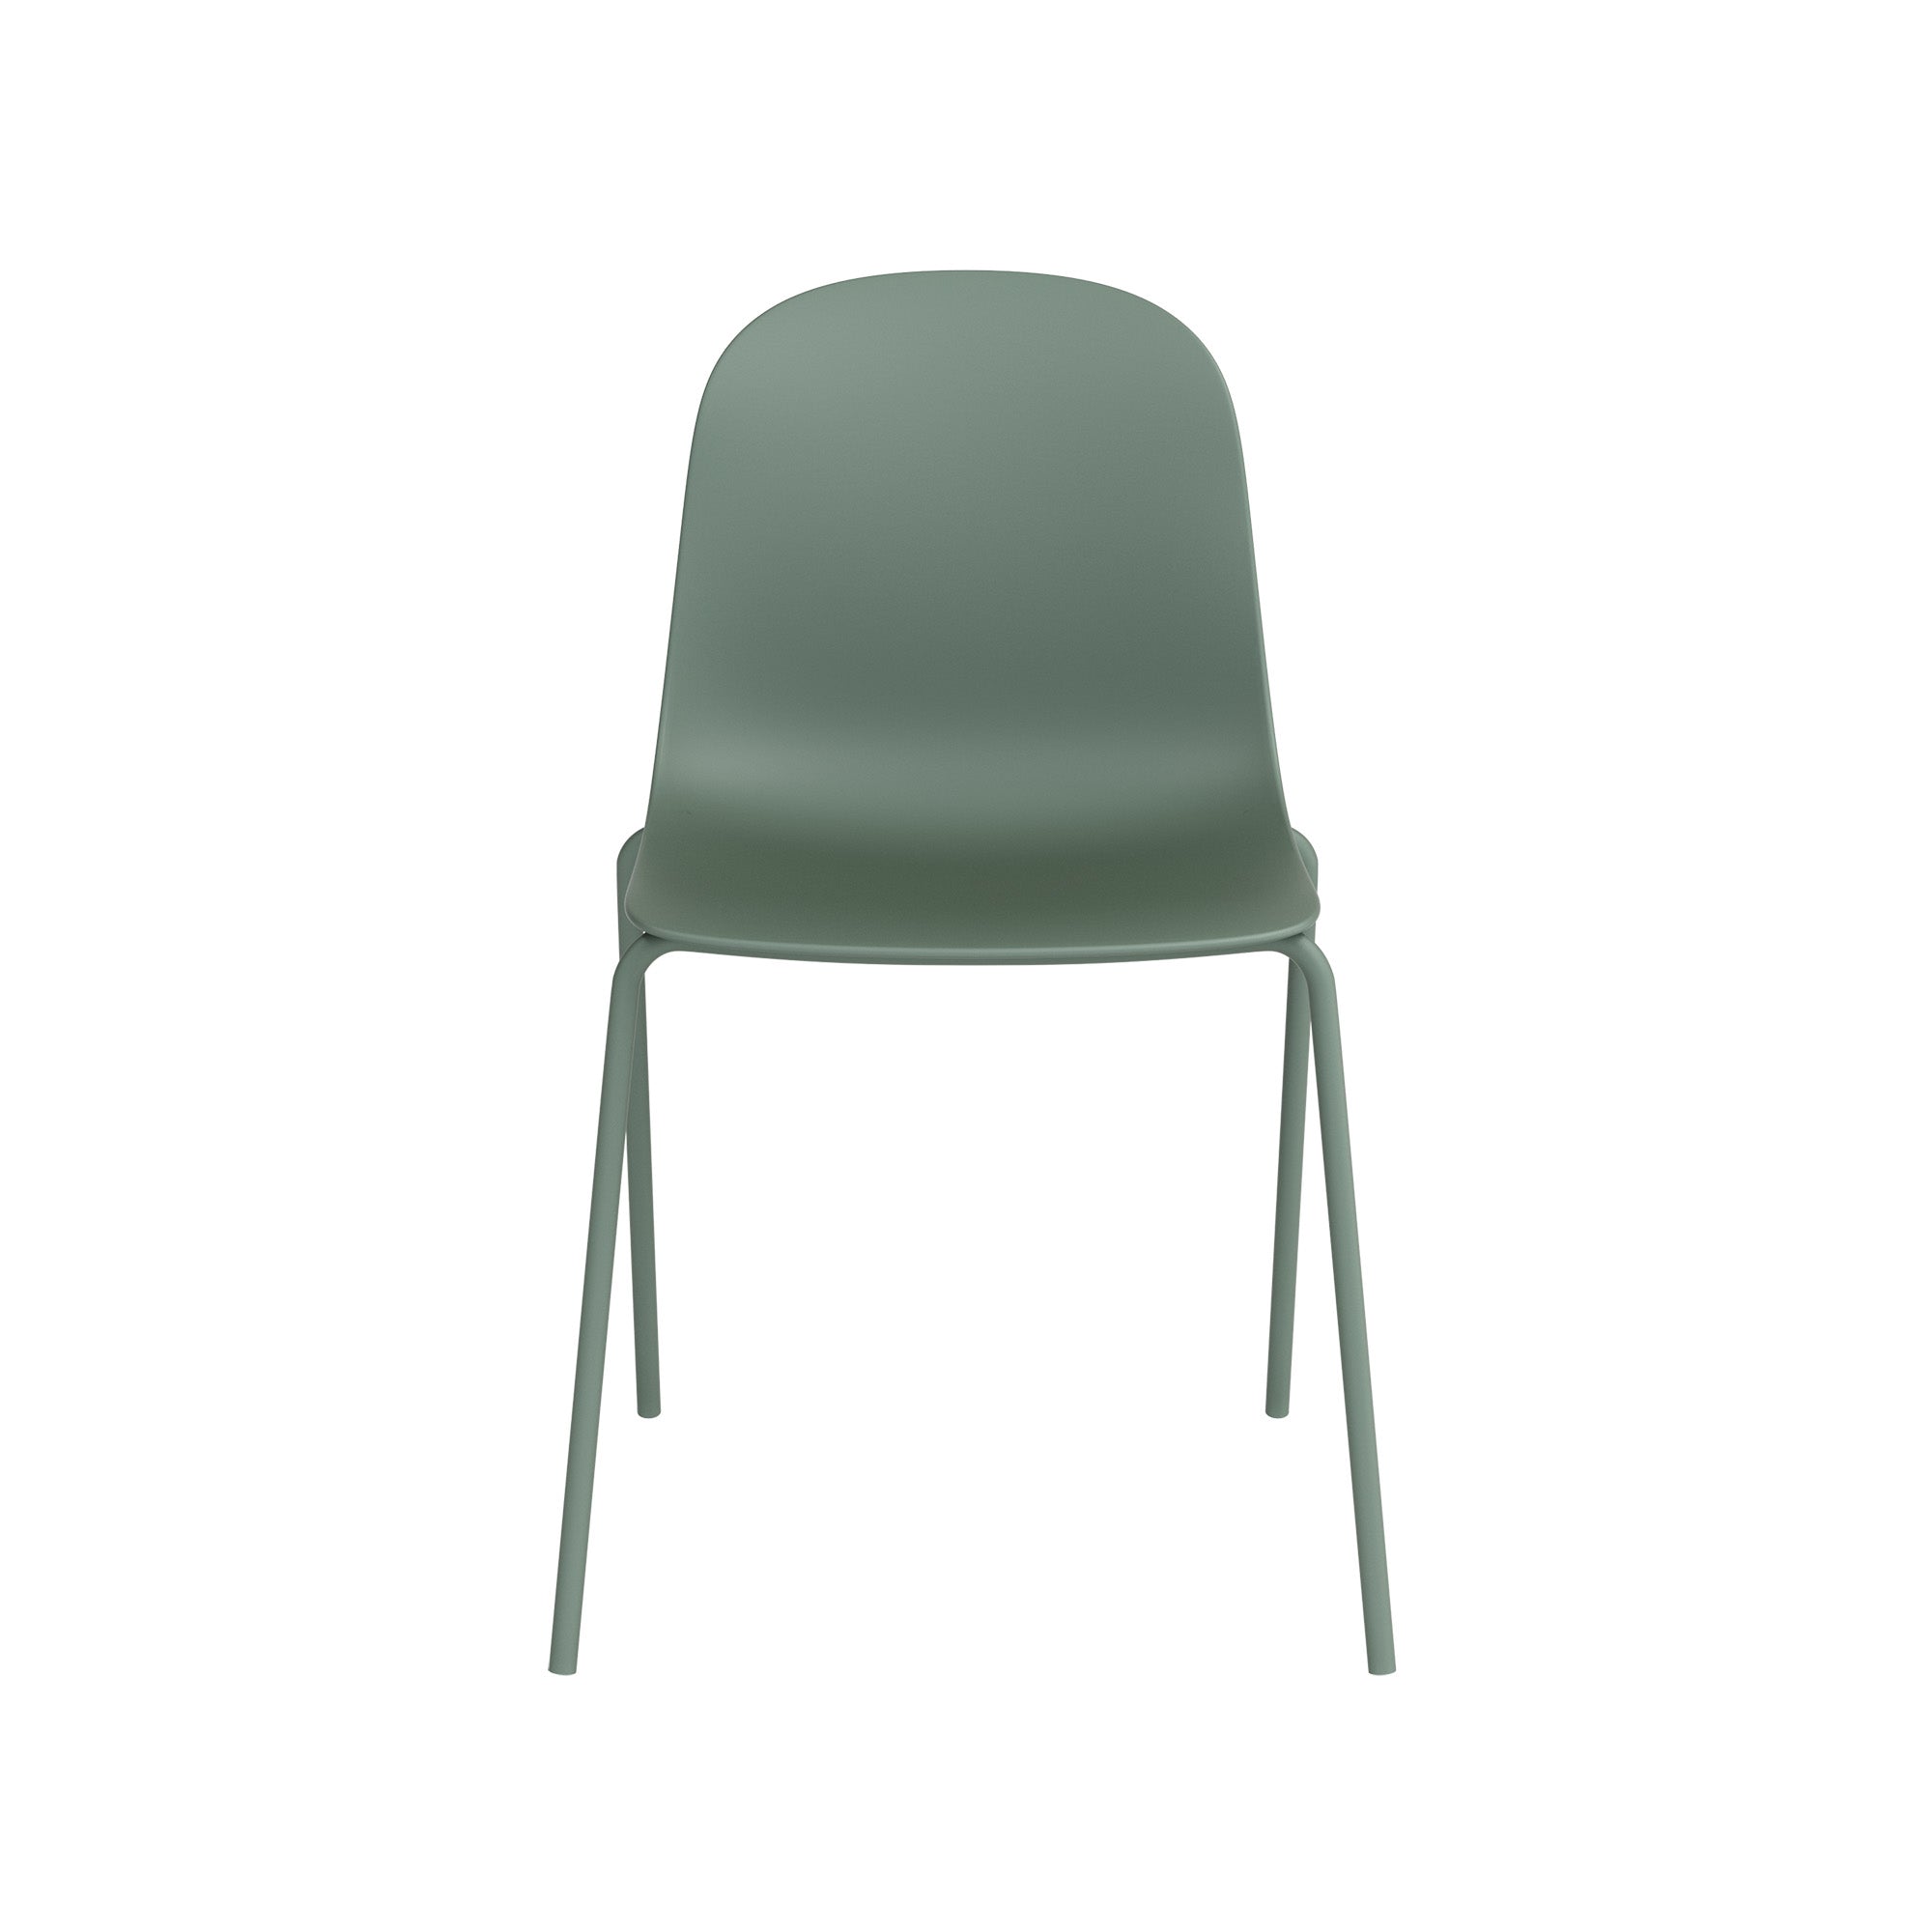 Serena Stackable Chair with Steel Frame - Aloe Green - Set of 4